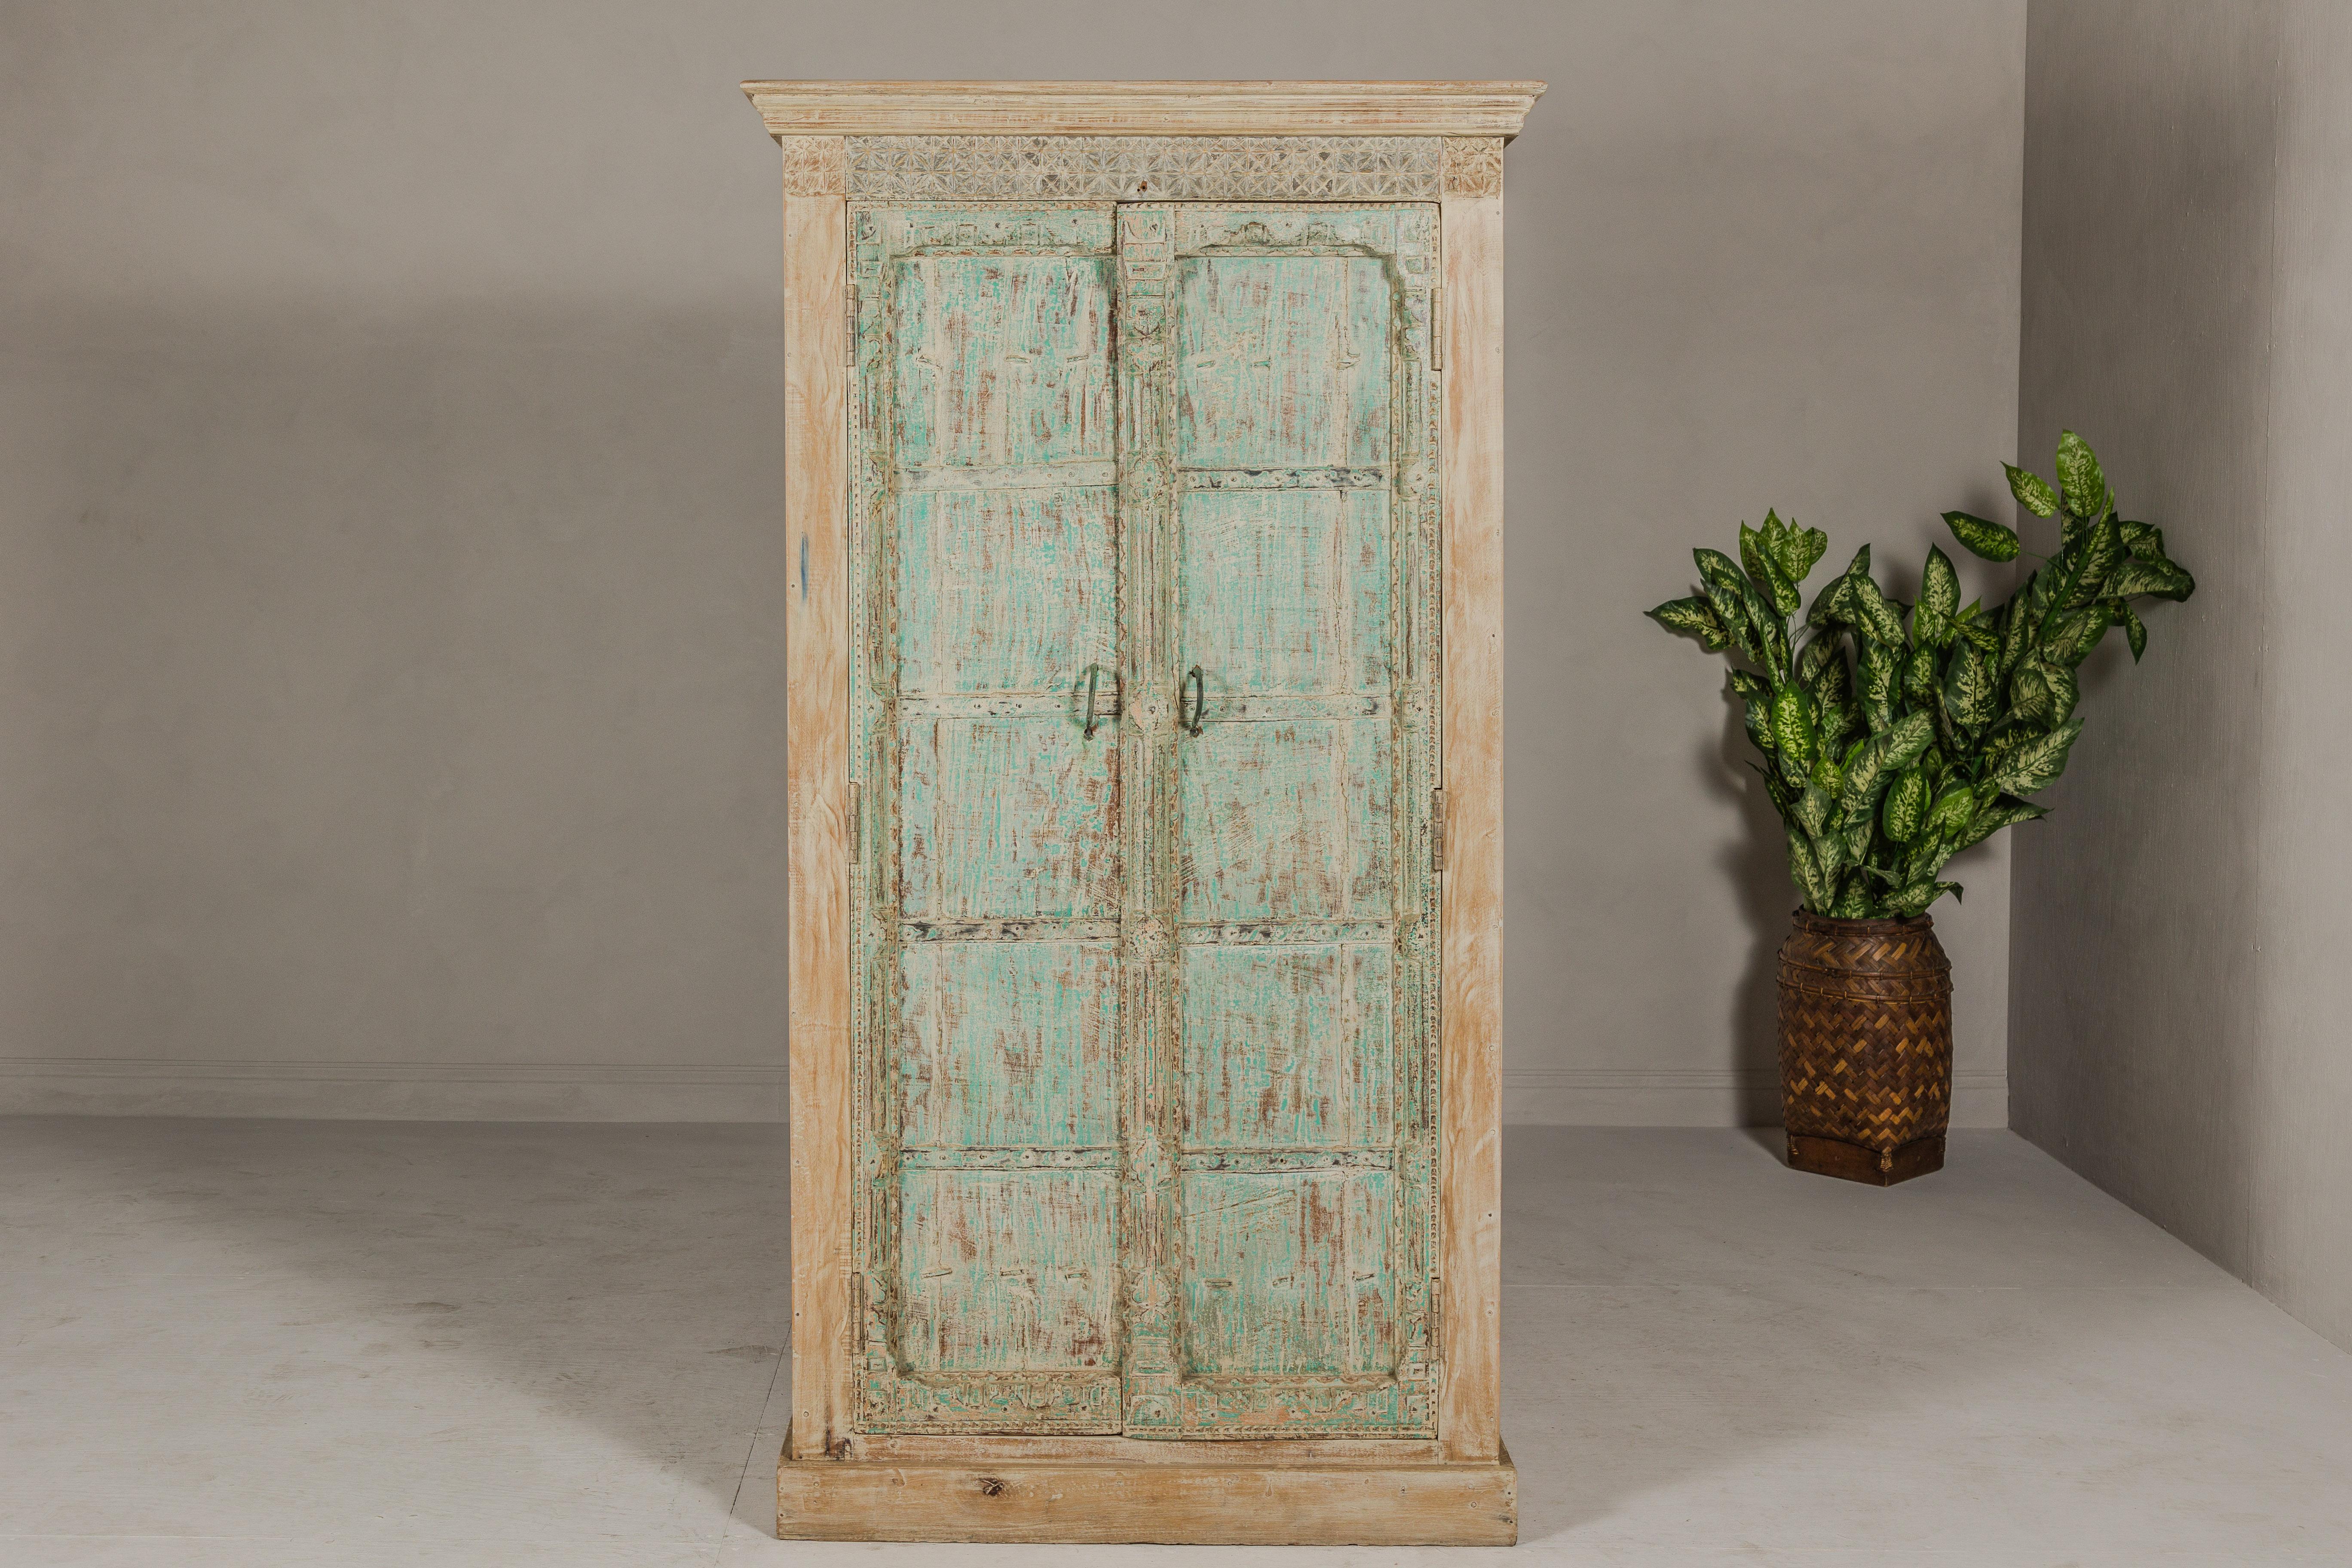 An Almirah armoire made from reclaimed wood, with weathered green patina, three interior shelves and carved décor. Experience the charm and history embedded in this exquisite Almirah armoire, meticulously crafted from reclaimed wood and adorned with